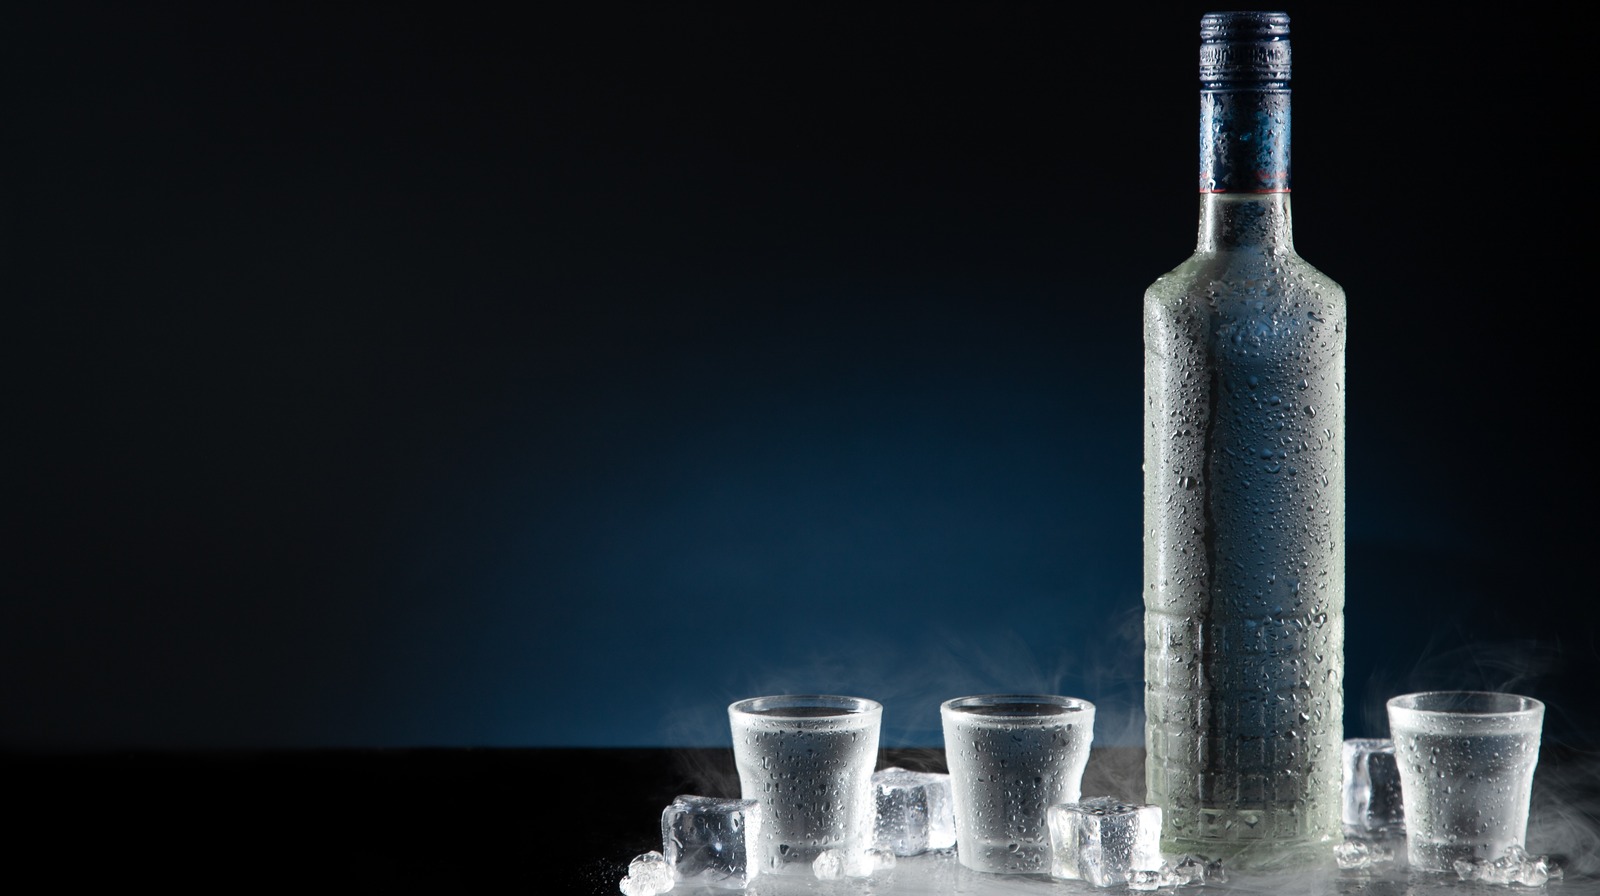 6 Litre Belvedere Vodka with light in base next to a stand…